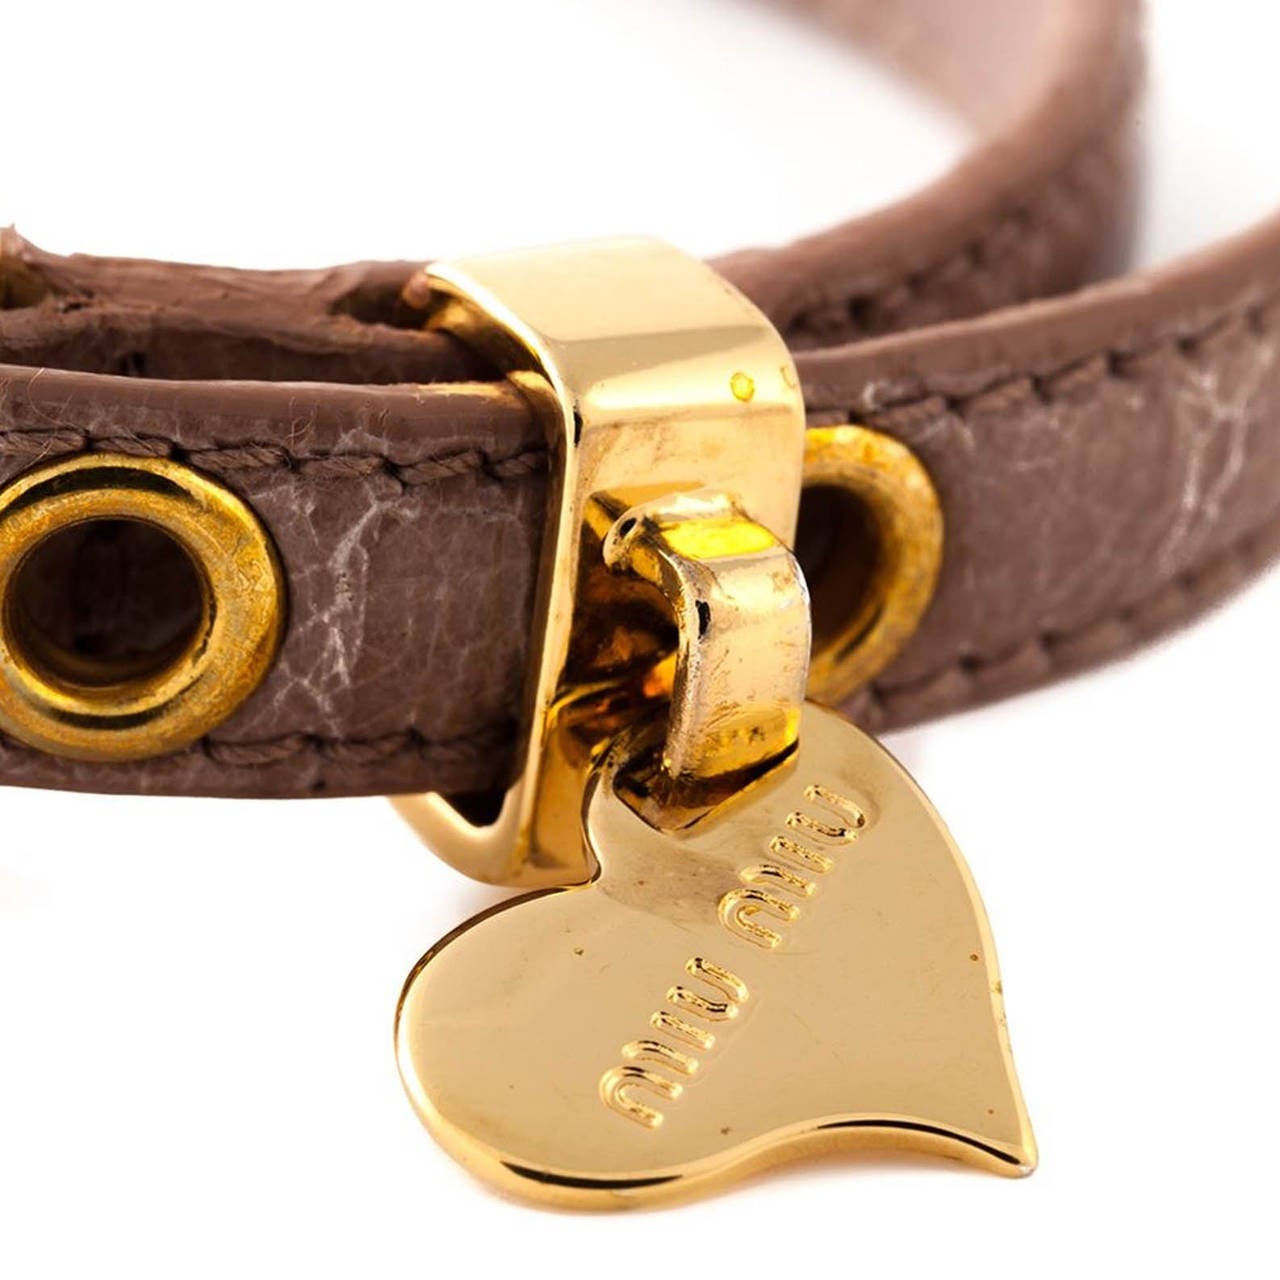 This Miu Miu bracelet features a gold-tone buckle fastening, gold-tone hardware and an embossed logo heart pendant and comes in Beige Leather.

Measurements: Circumference: 17 cm

Material: Leather

Colour: Beige